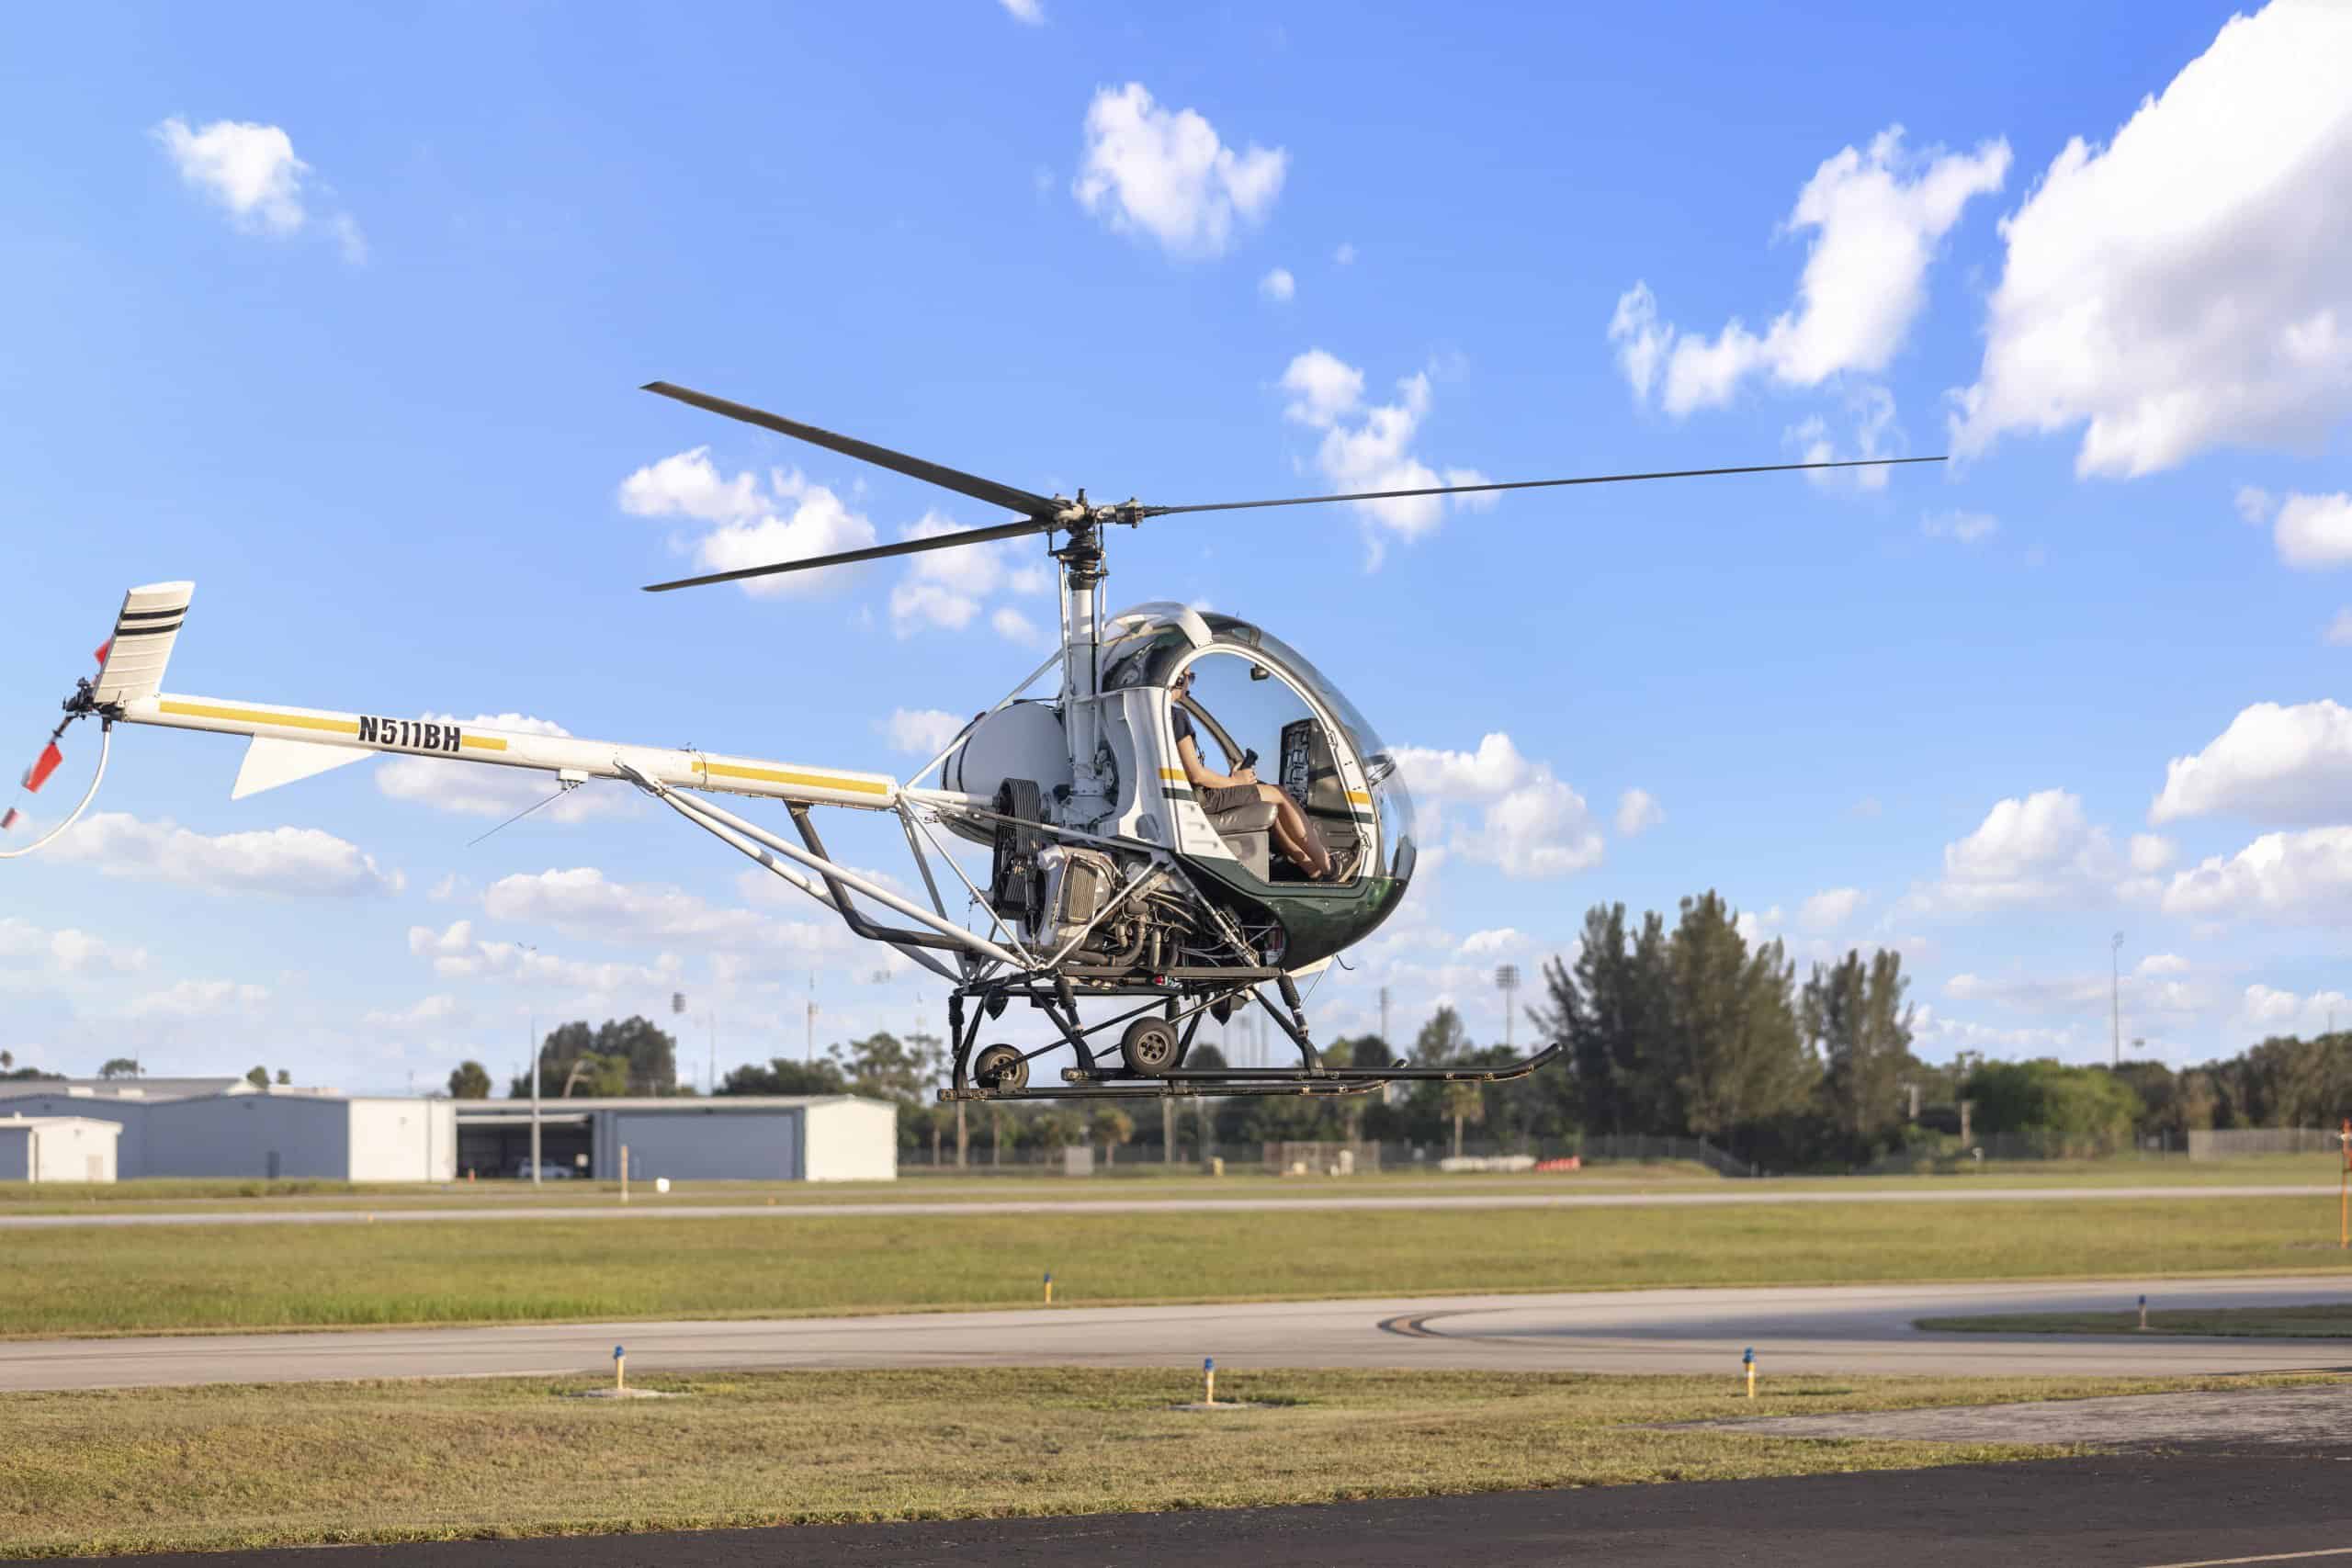 Photo of a helicopter hovering over a runway with low buildings in the background